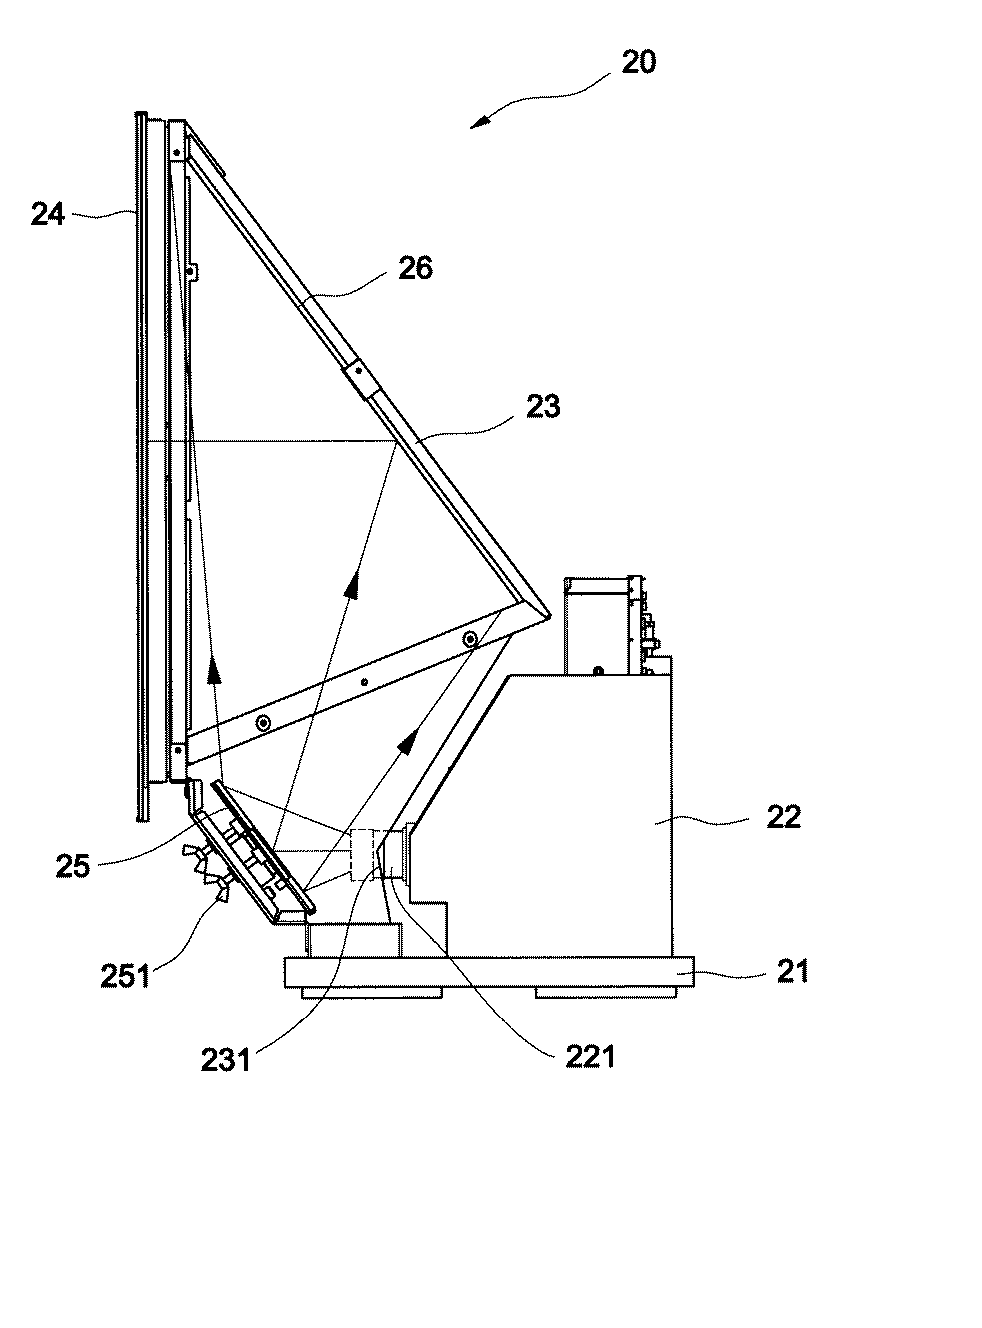 Optical assembly for rear projection television